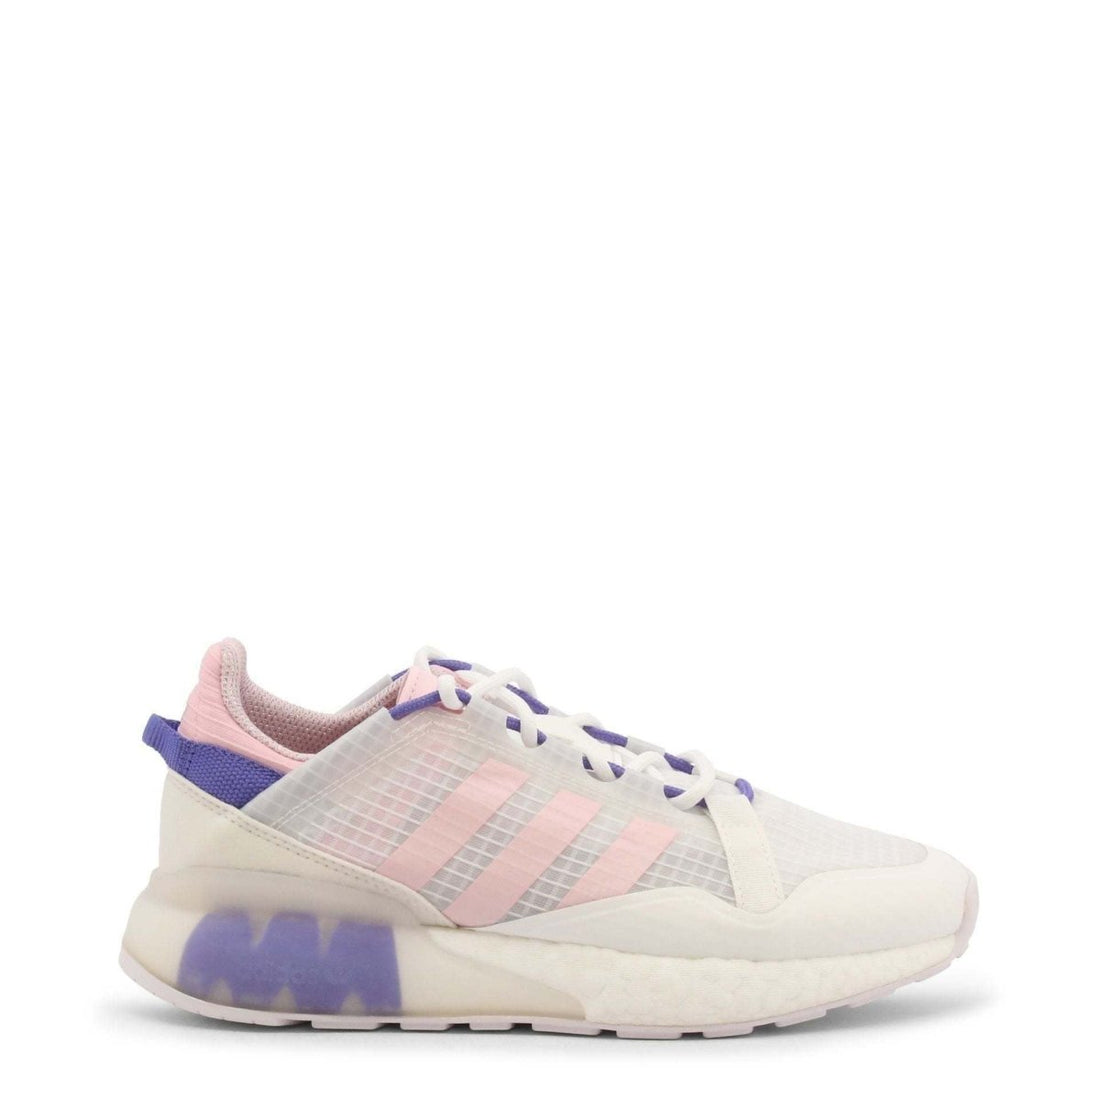 Adidas Sneakers - TINT - Sneakers - Adidas - GZ7874_ZX2K-Boost-Pure:349618